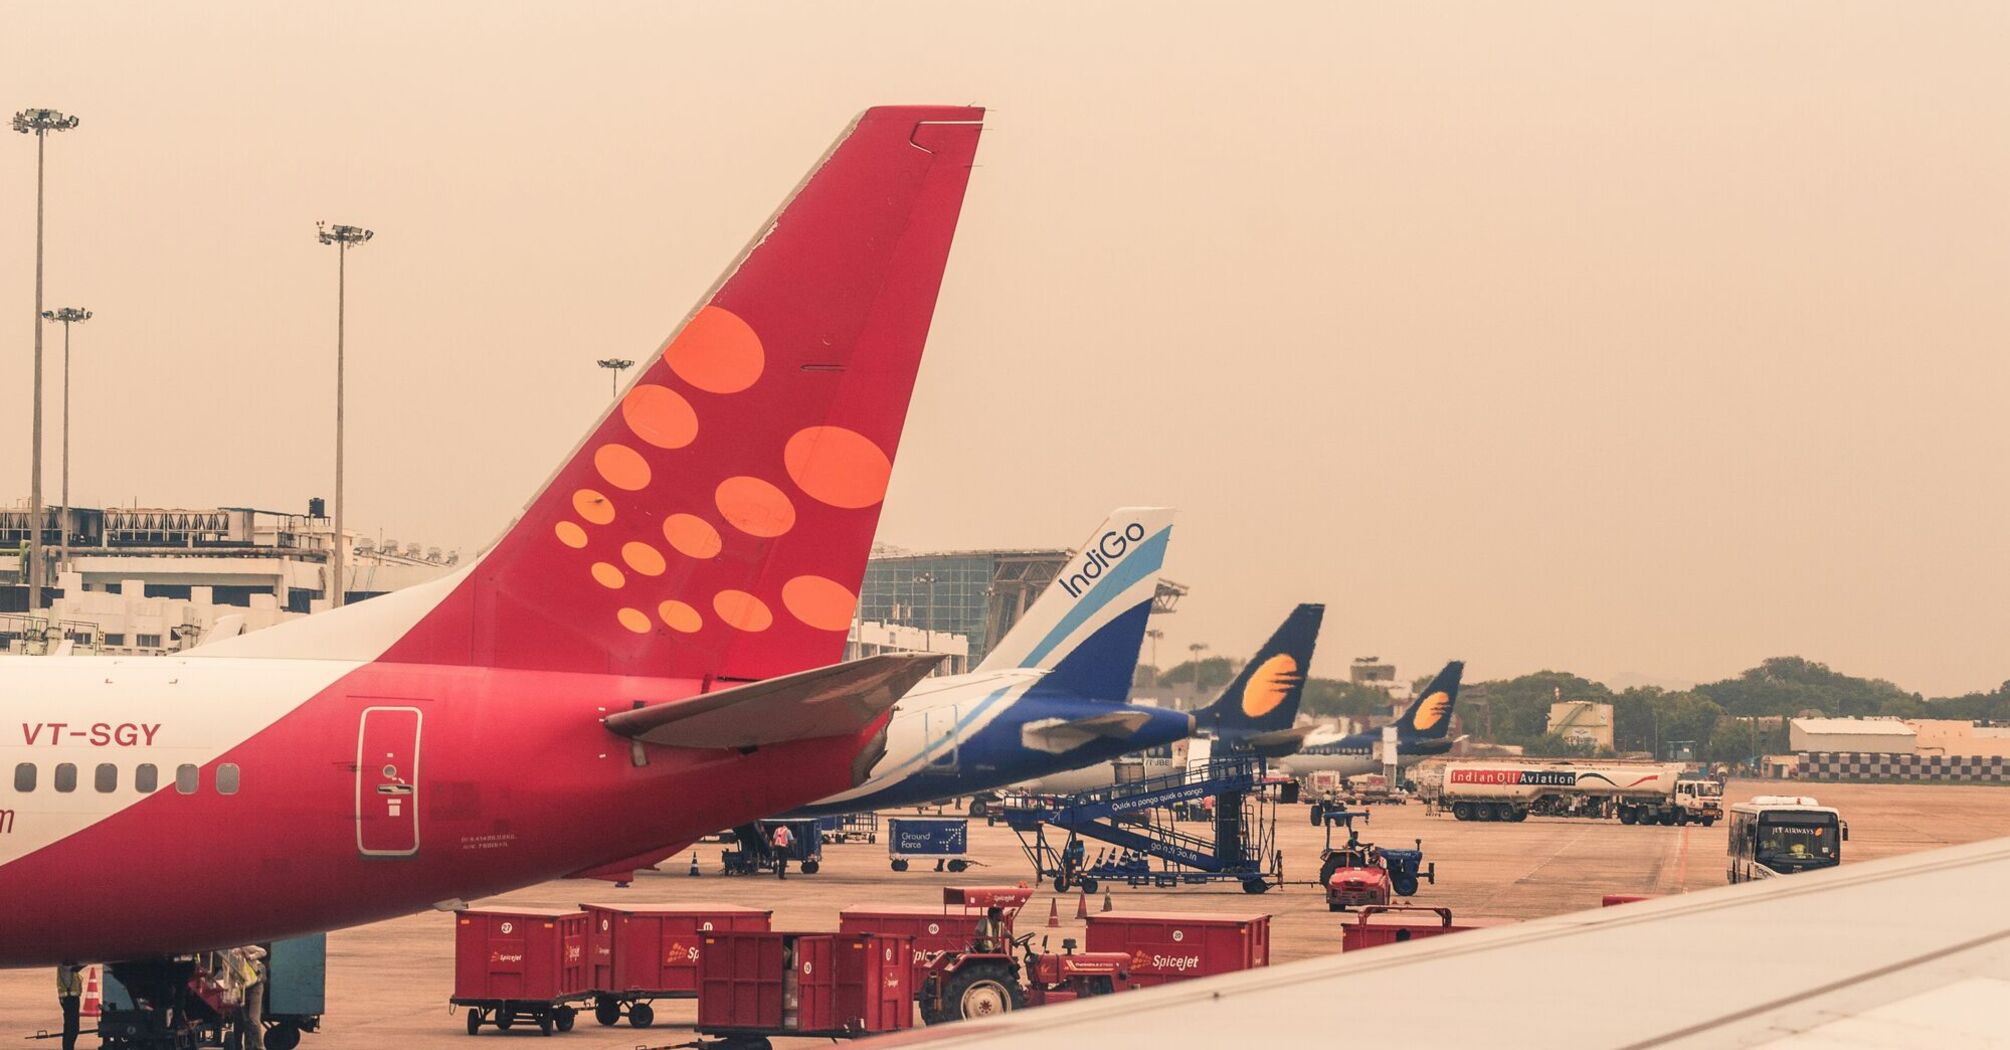 Four airliners parked beside airport